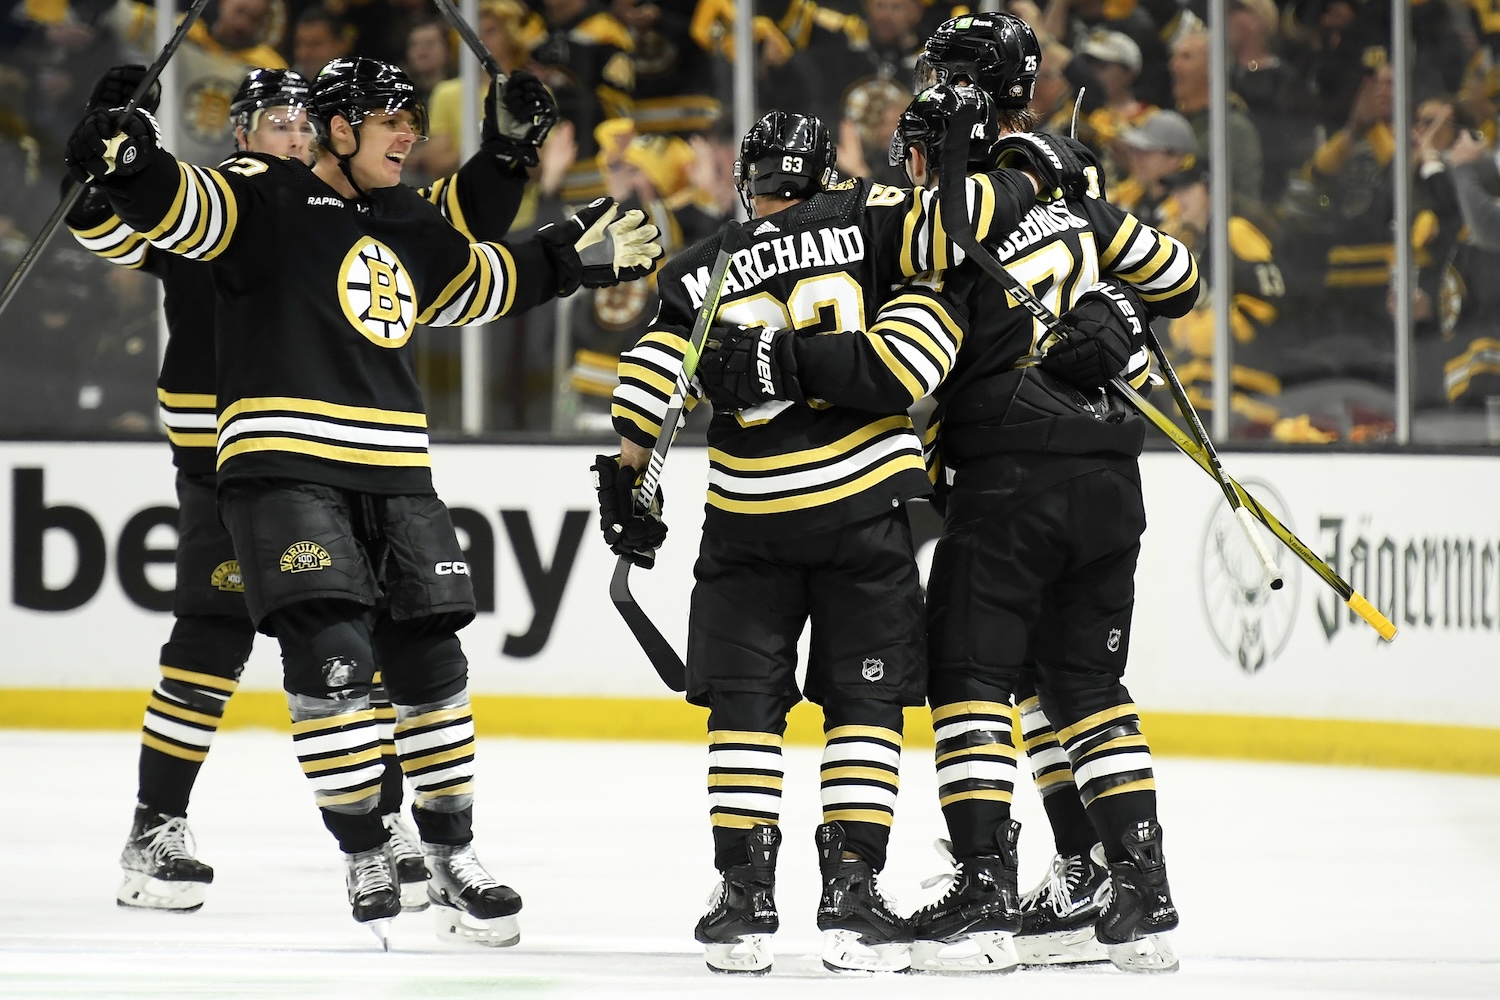 Bruins Game-Breaker: The B's went from near-disaster to the game-winning goal in a span of less than two minutes in their Game 1 win over the Maple Leafs.